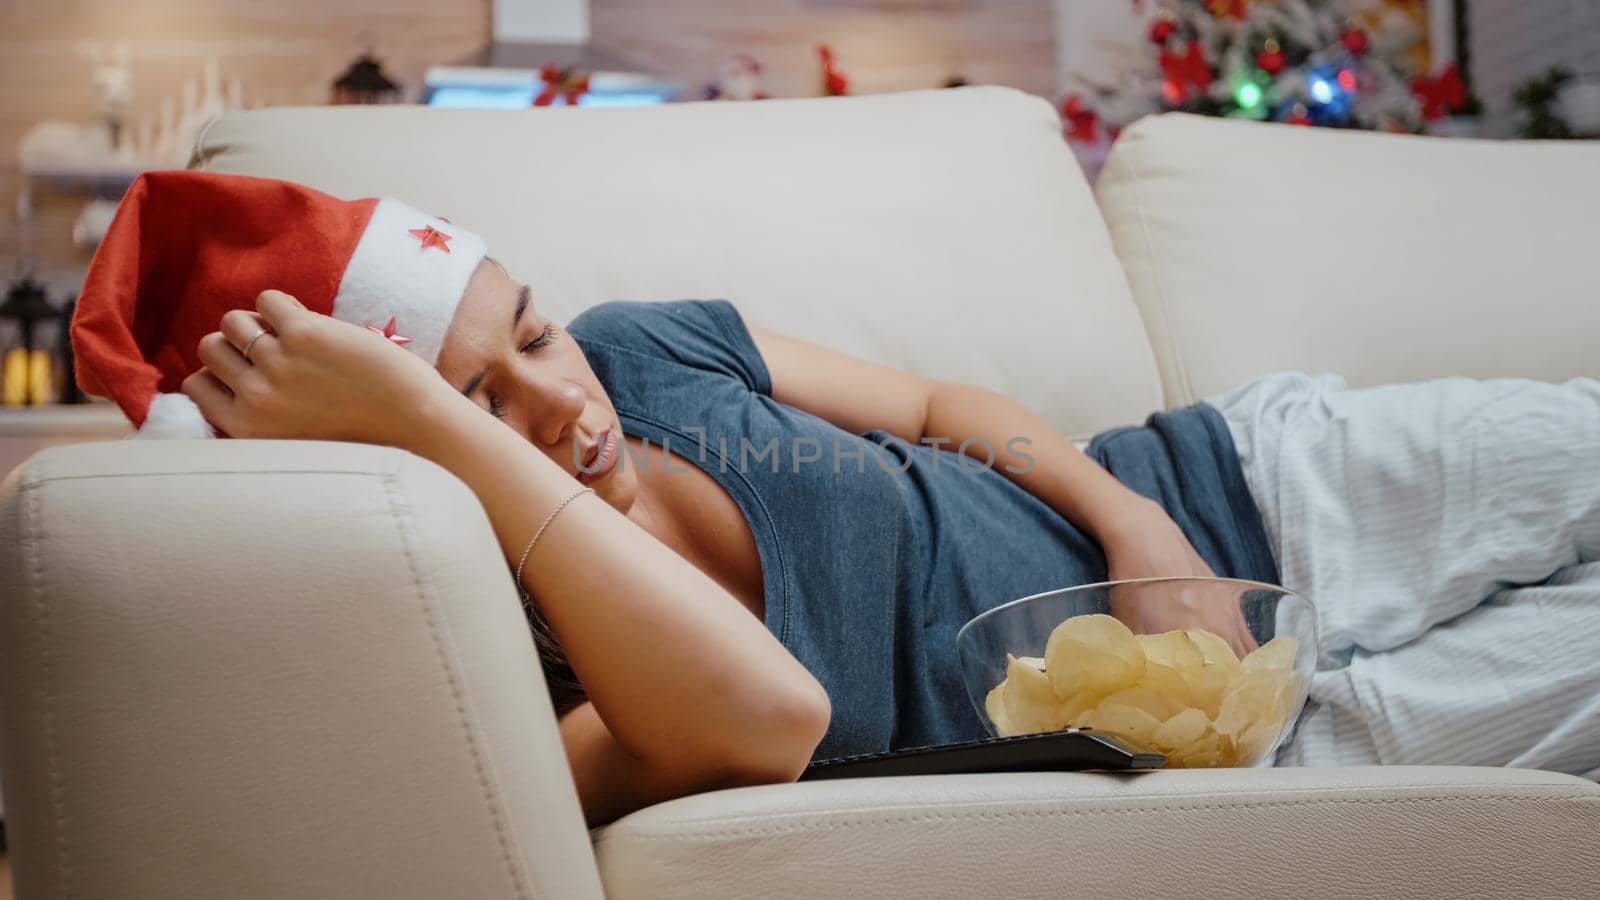 Close up of adult sleeping on couch with bowl of chips and TV remote control. Woman wearing santa hat resting on christmas holiday at television screen. Person alseep on sofa.